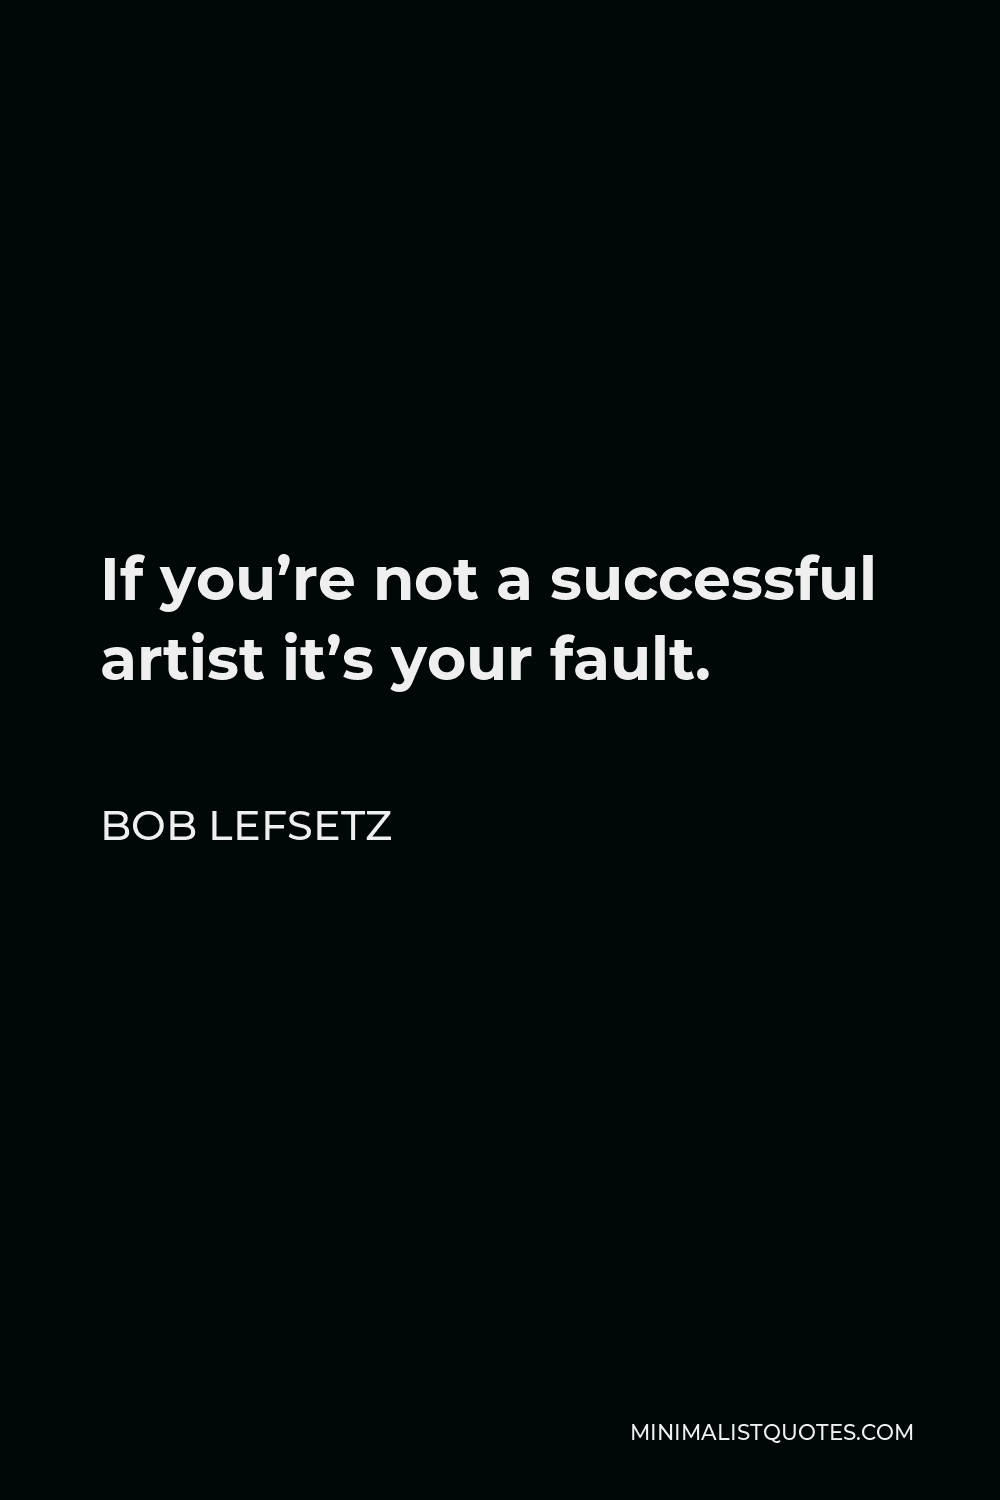 Bob Lefsetz Quote - If you’re not a successful artist it’s your fault.